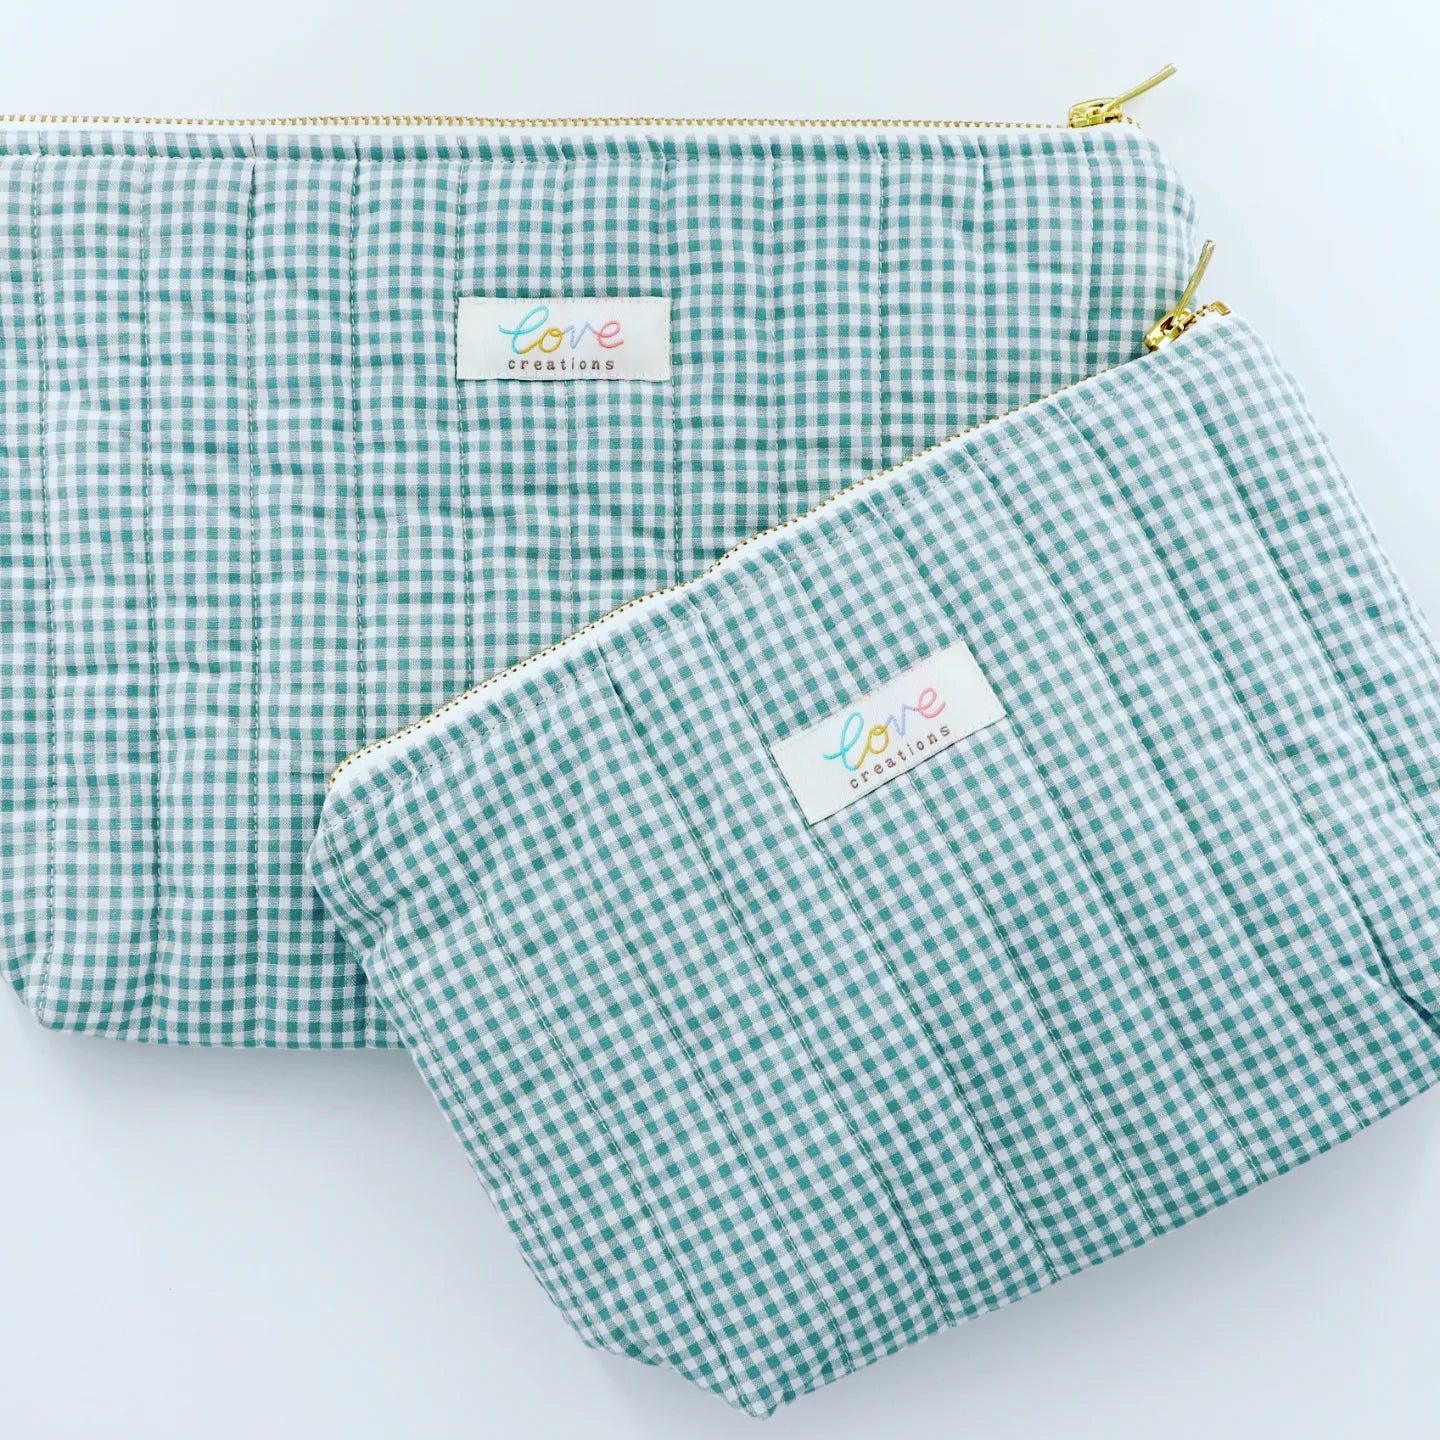 Washbags & Cosmetic bags